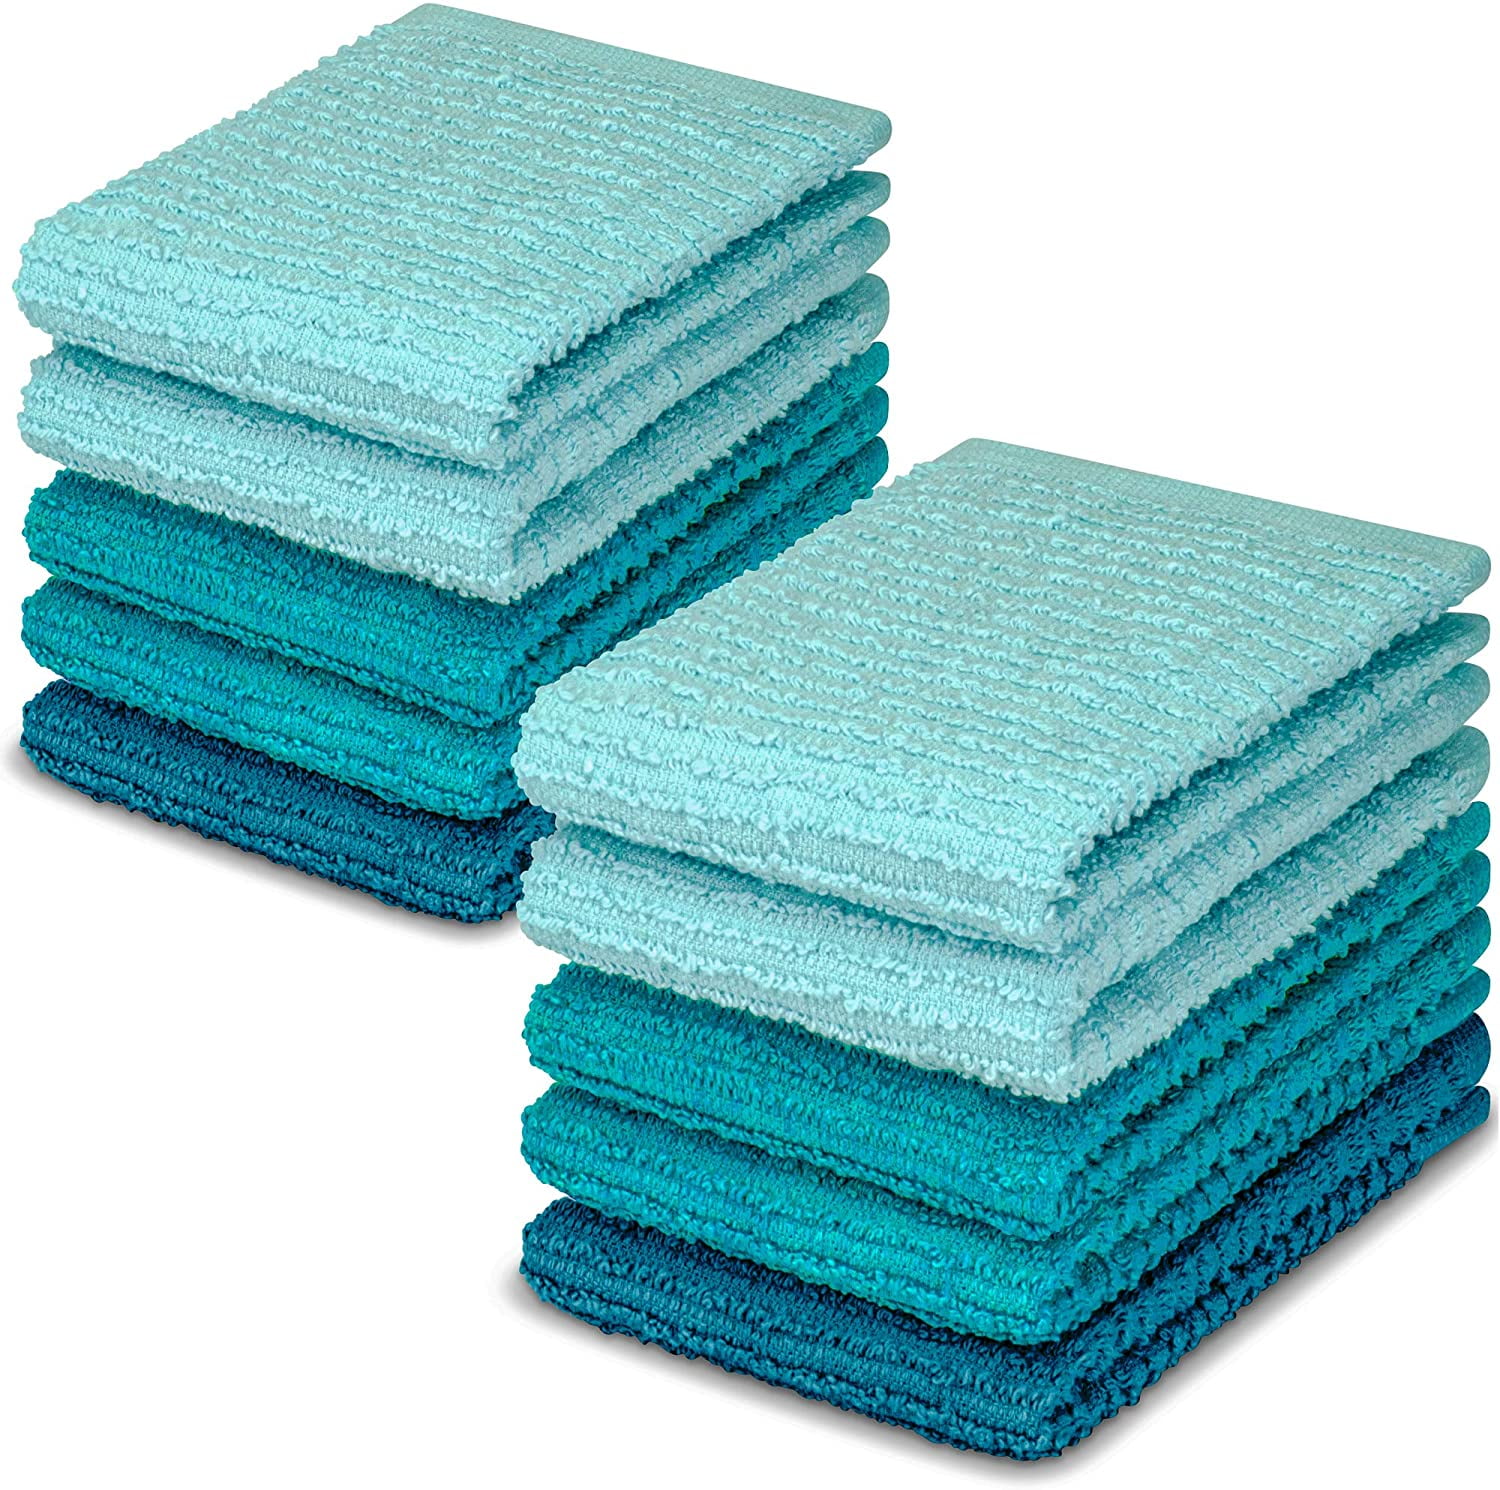 Details about   Family Chef 5  Microfiber Hand Towels   Assorted Colors 